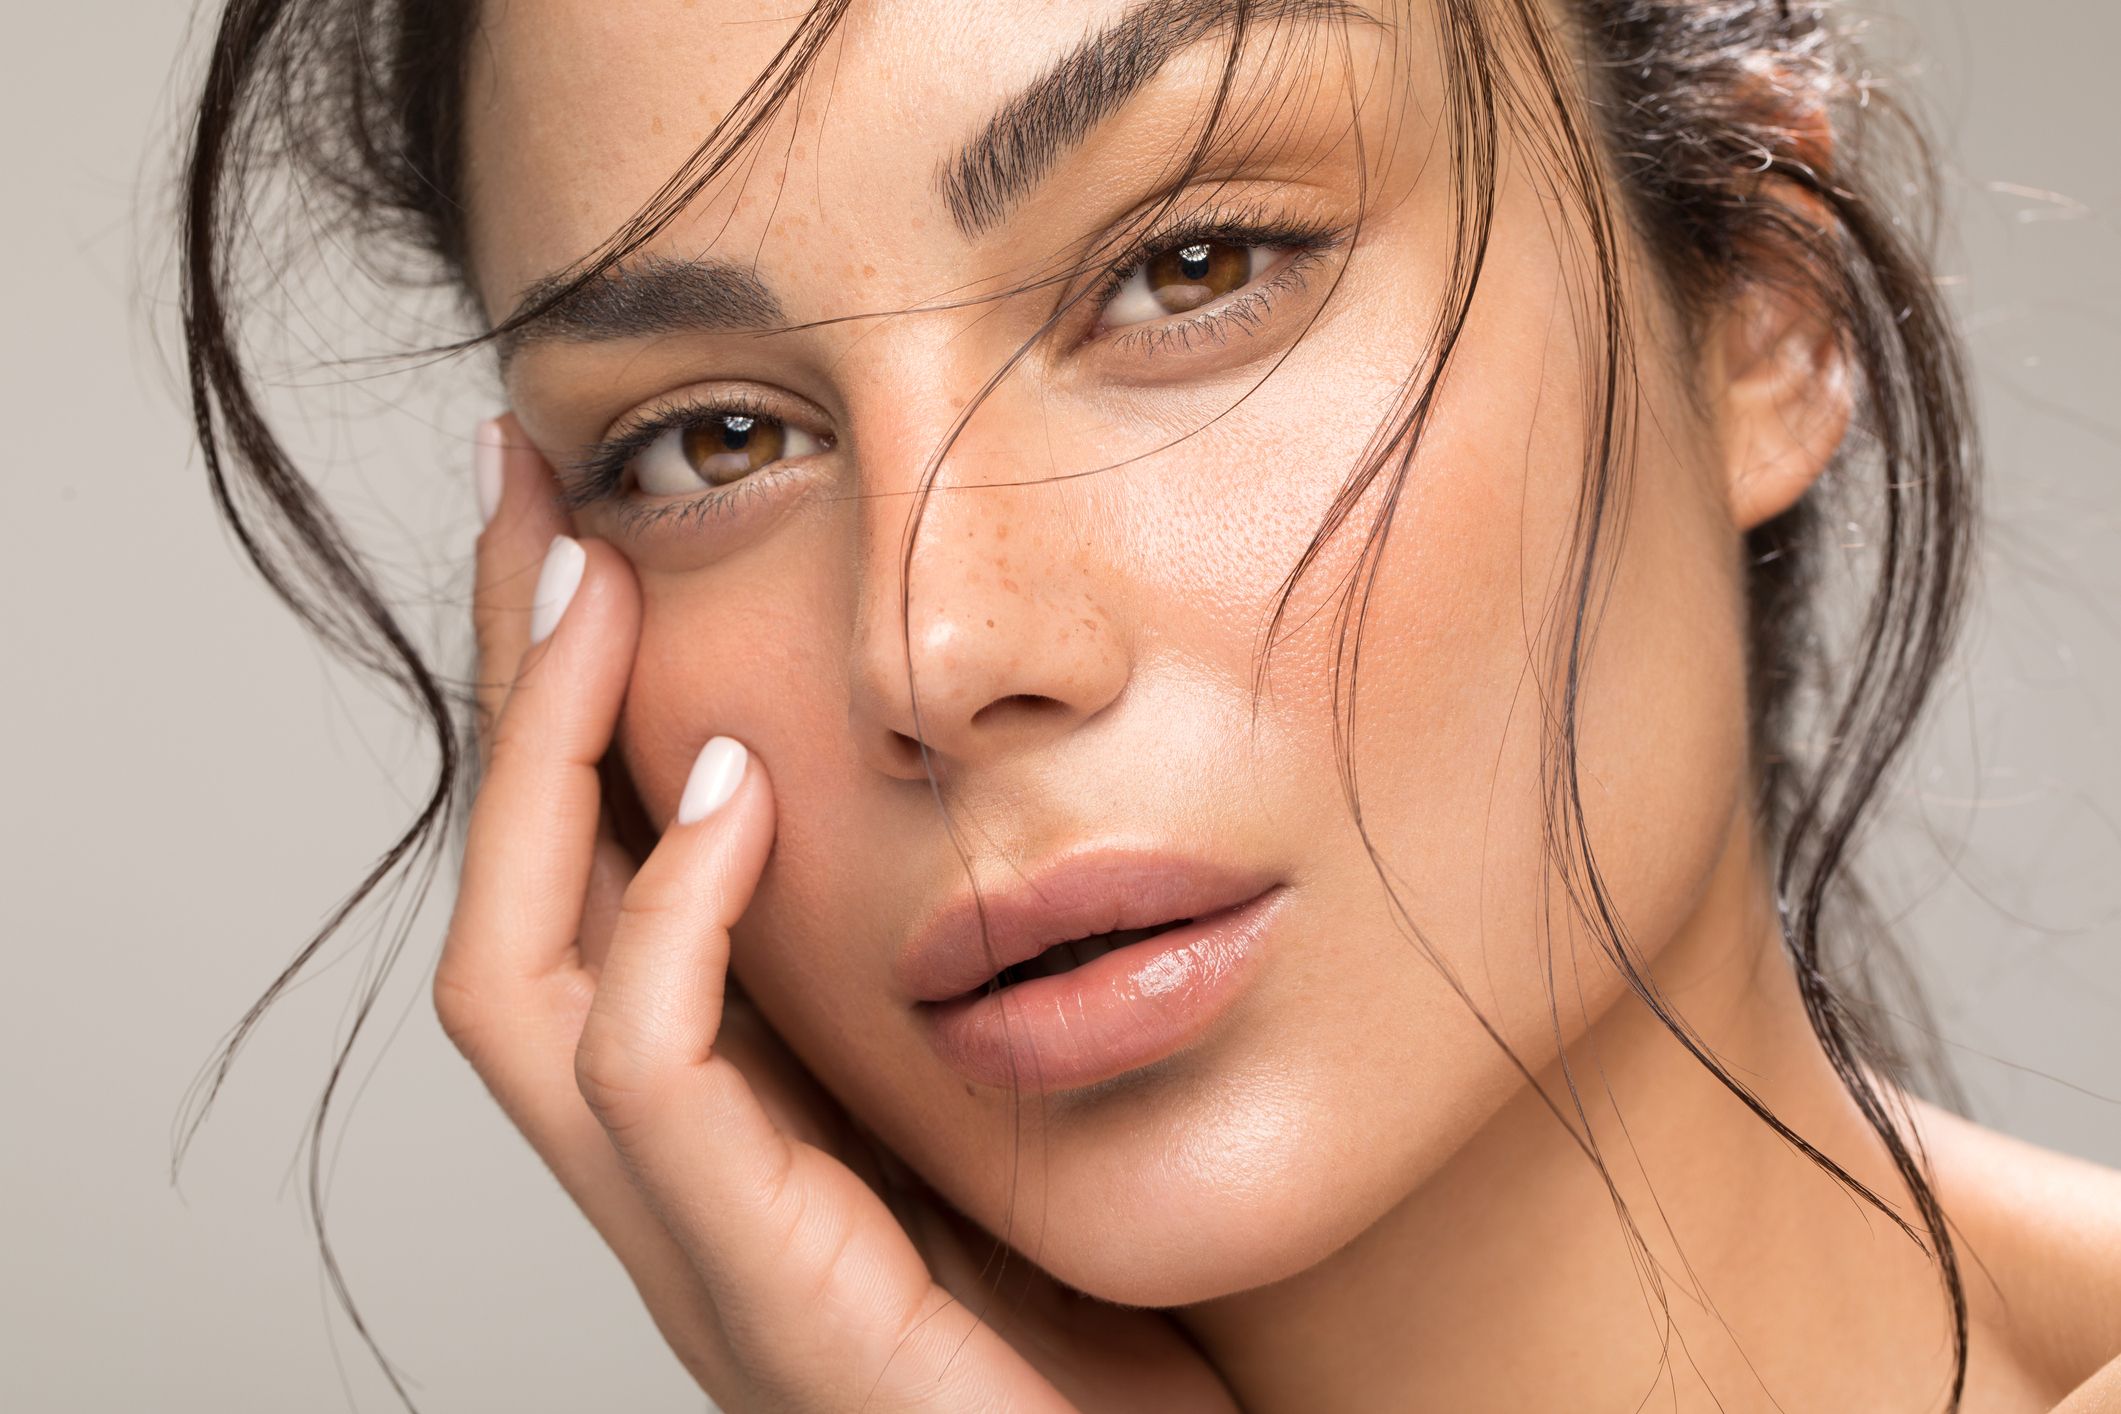 5 Skincare Tips to Look Pretty and Polished Without Makeup